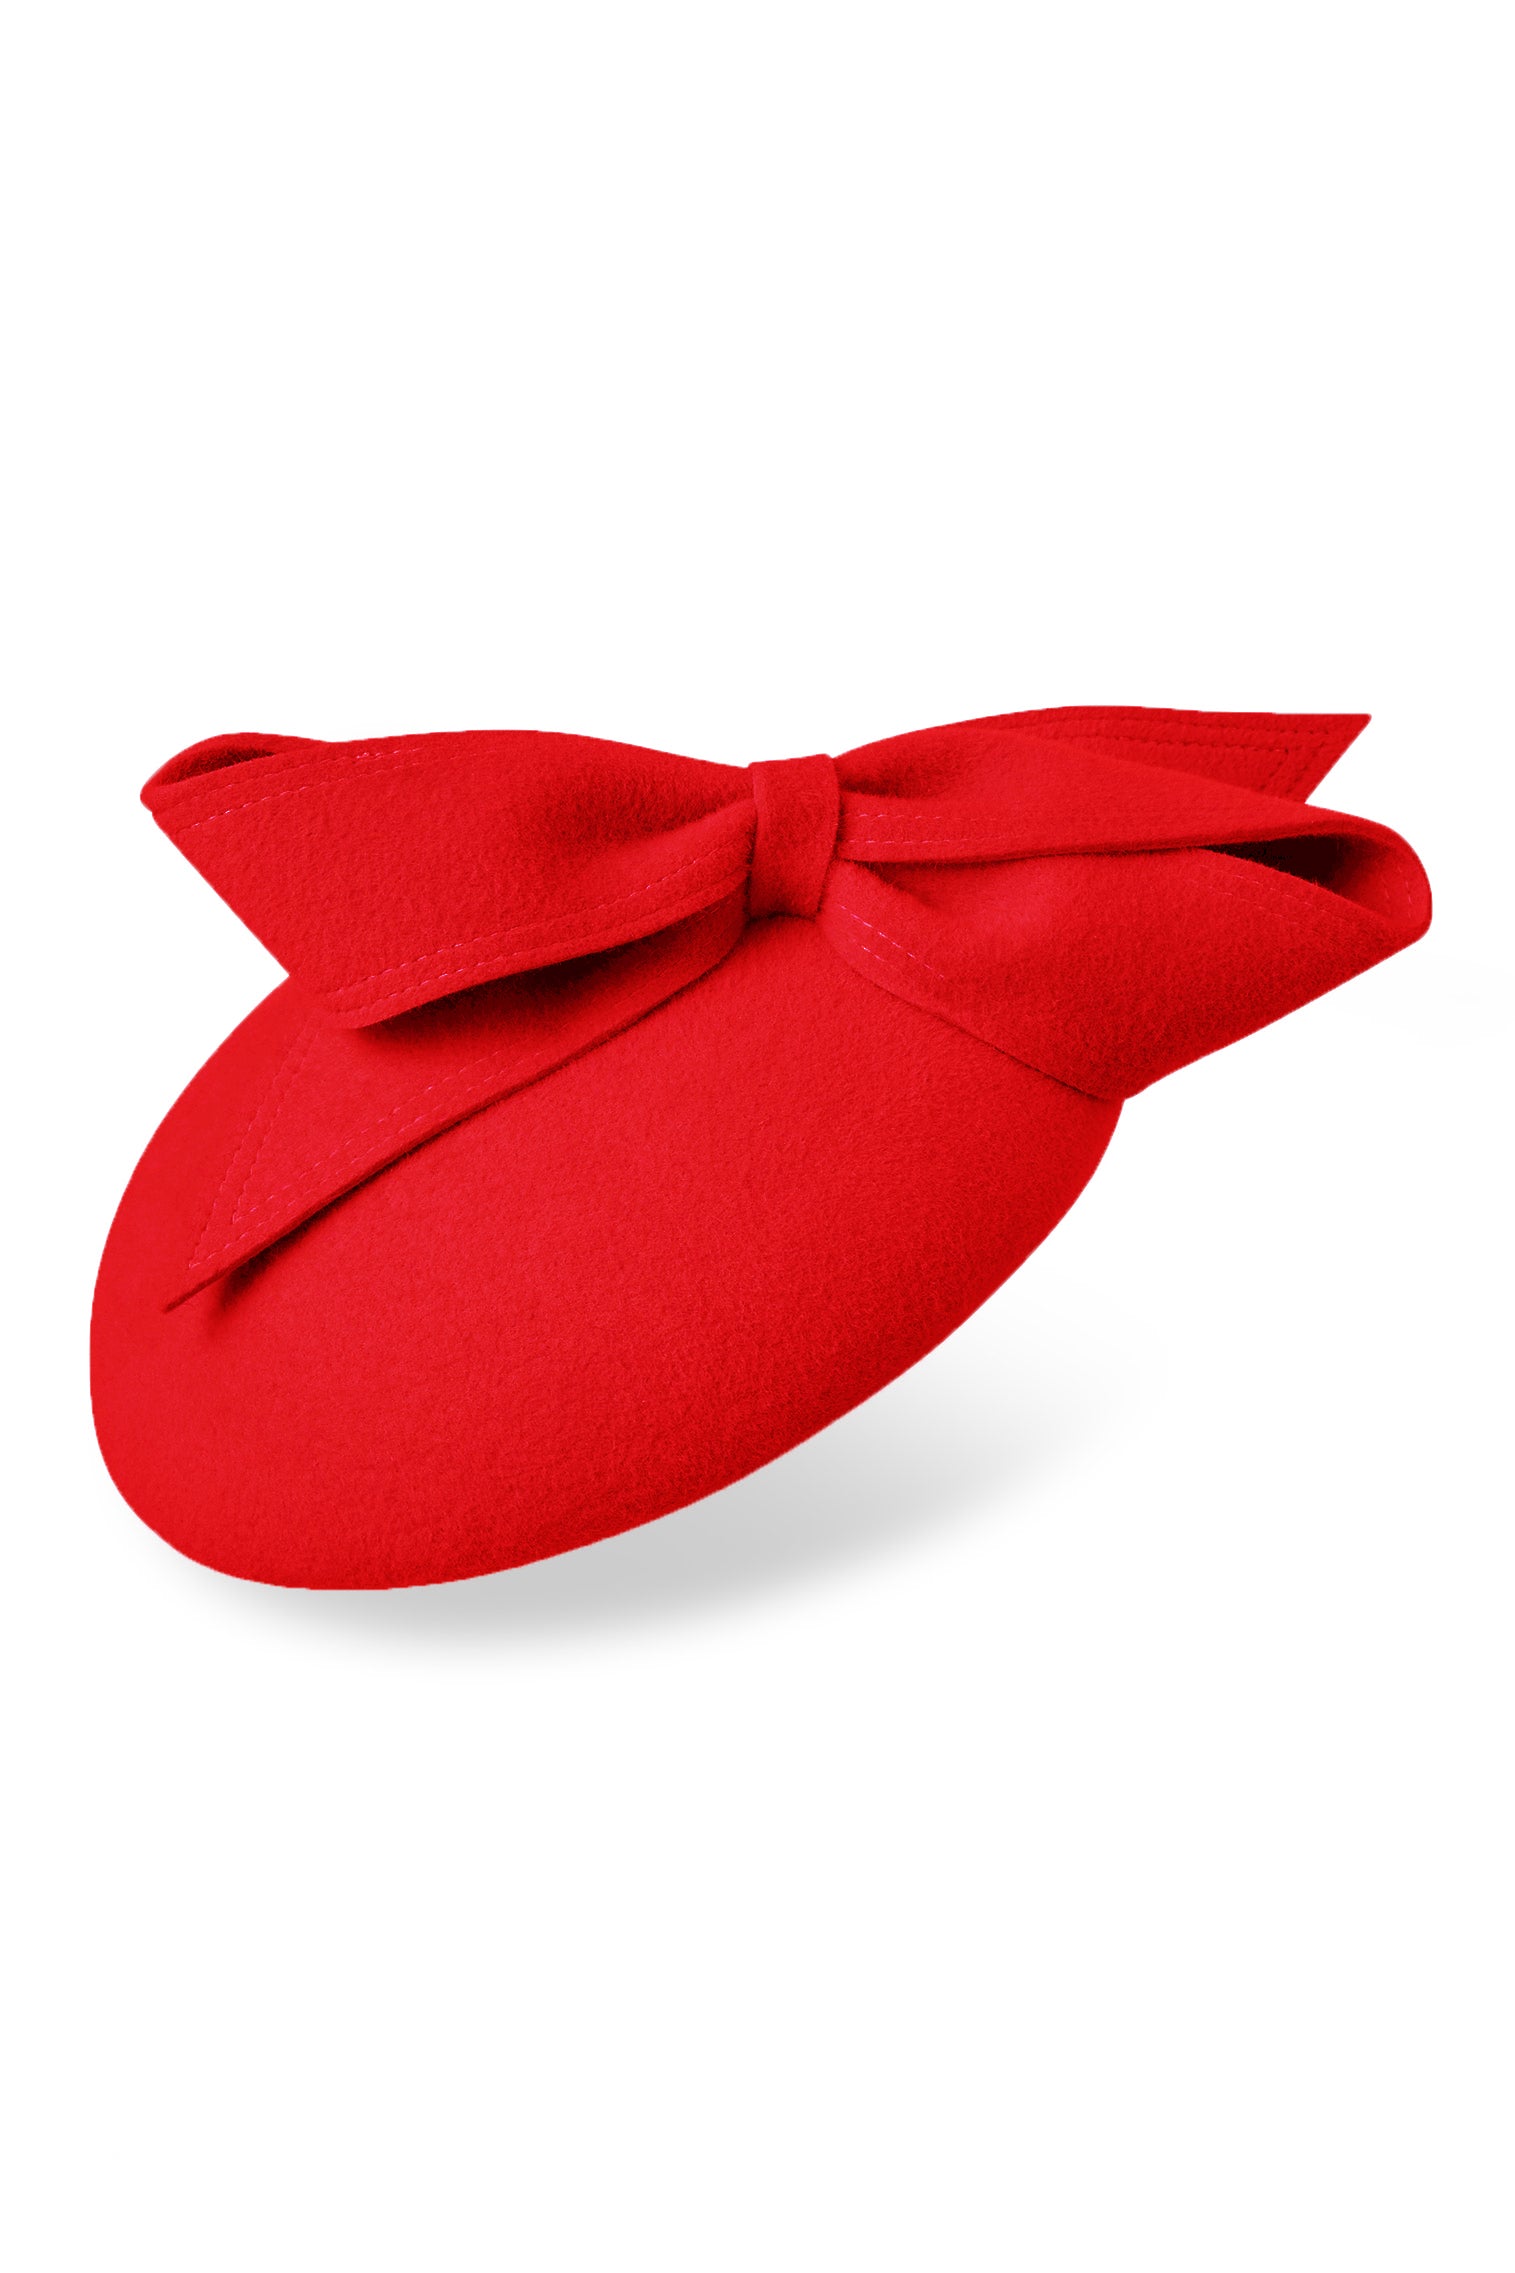 Lana Red Button Hat - Lock Couture by Awon Golding - Lock & Co. Hatters London UK